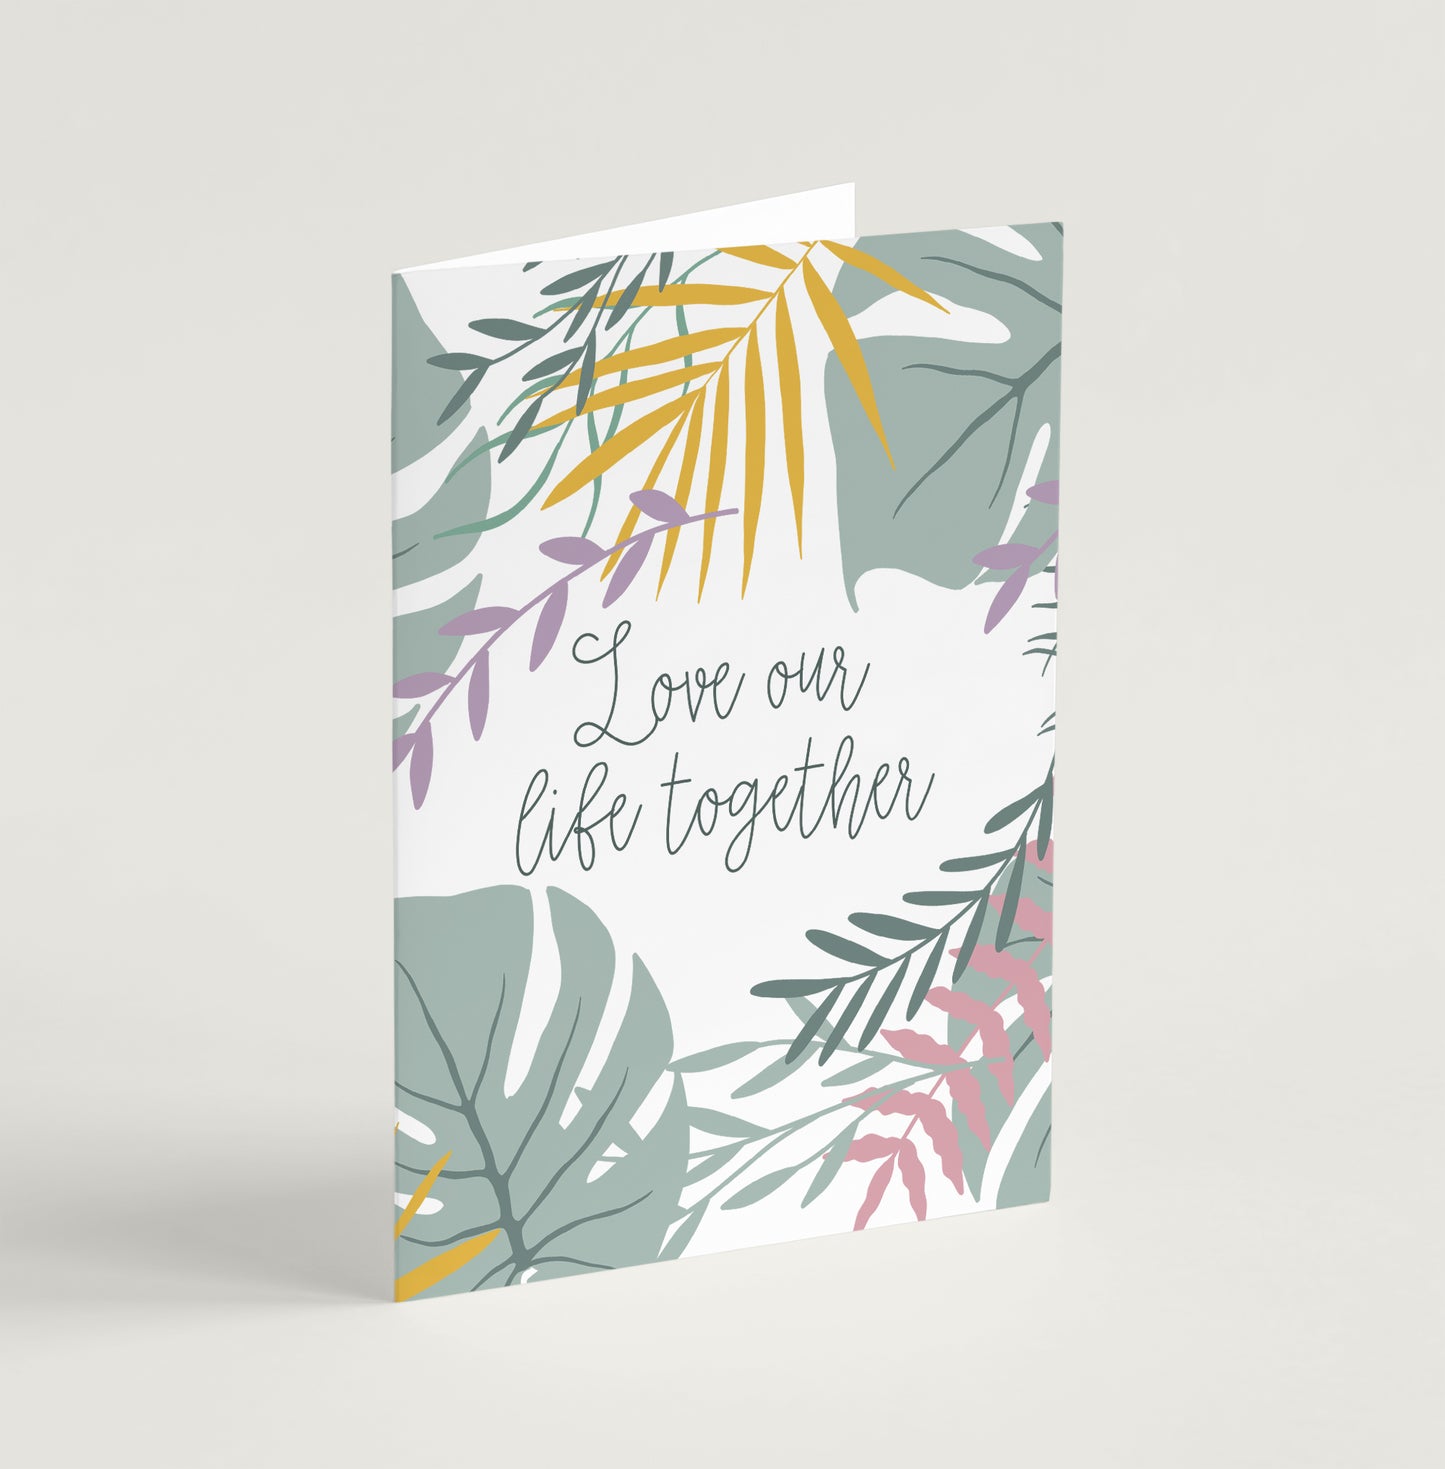 'Love our life together' (Jungle Pink) - Greeting Card